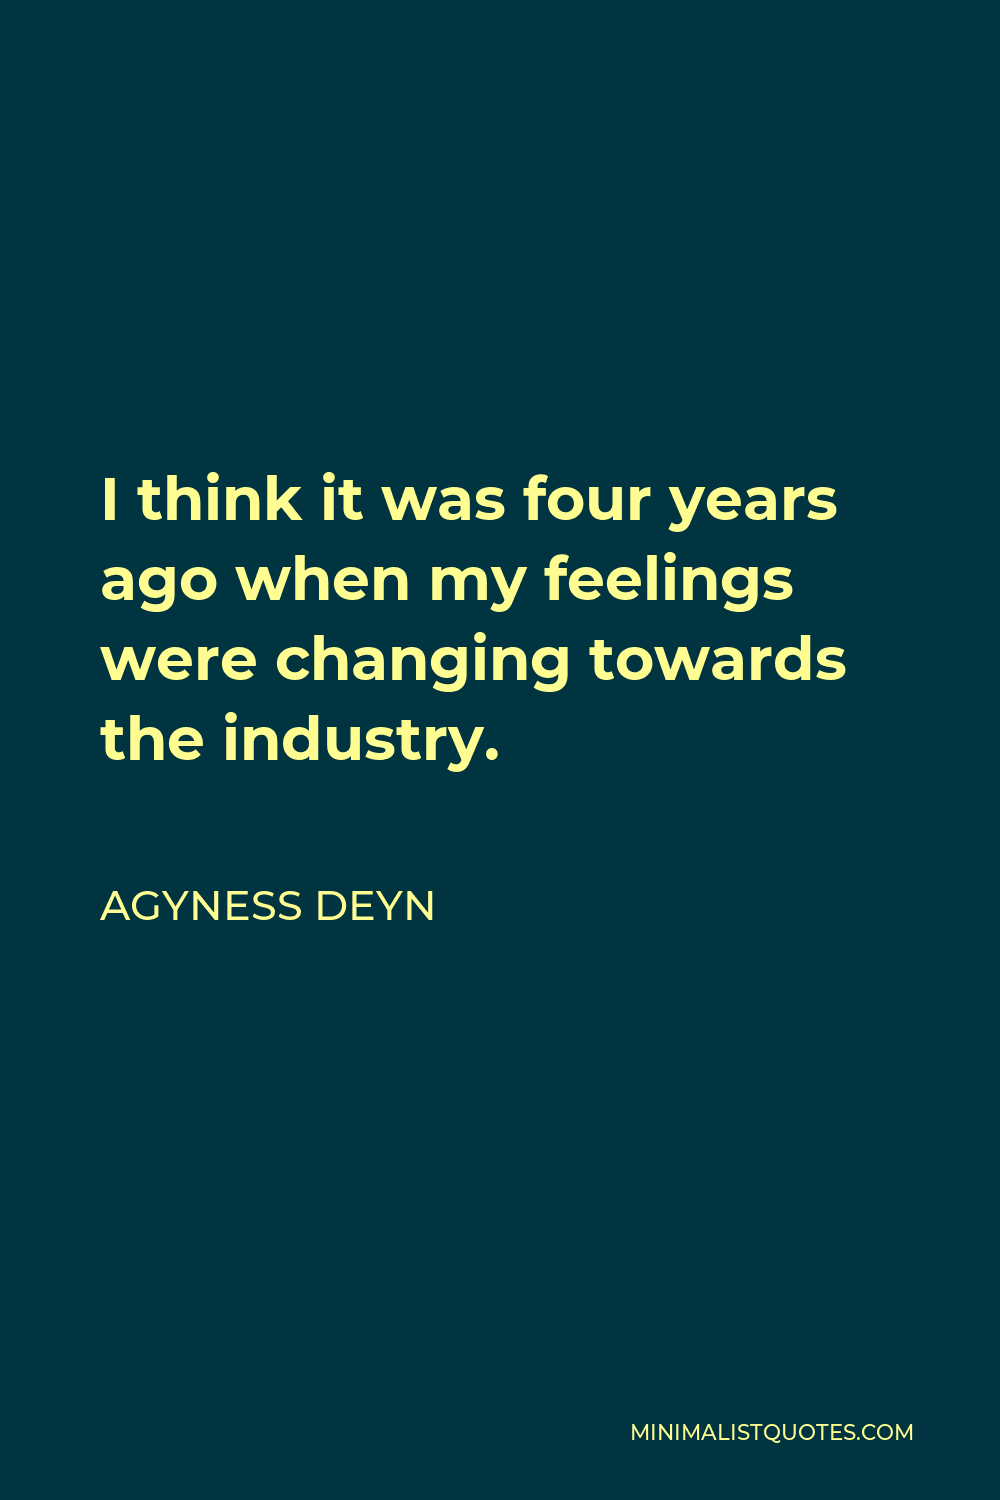 Agyness Deyn Quote - I think it was four years ago when my feelings were changing towards the industry.